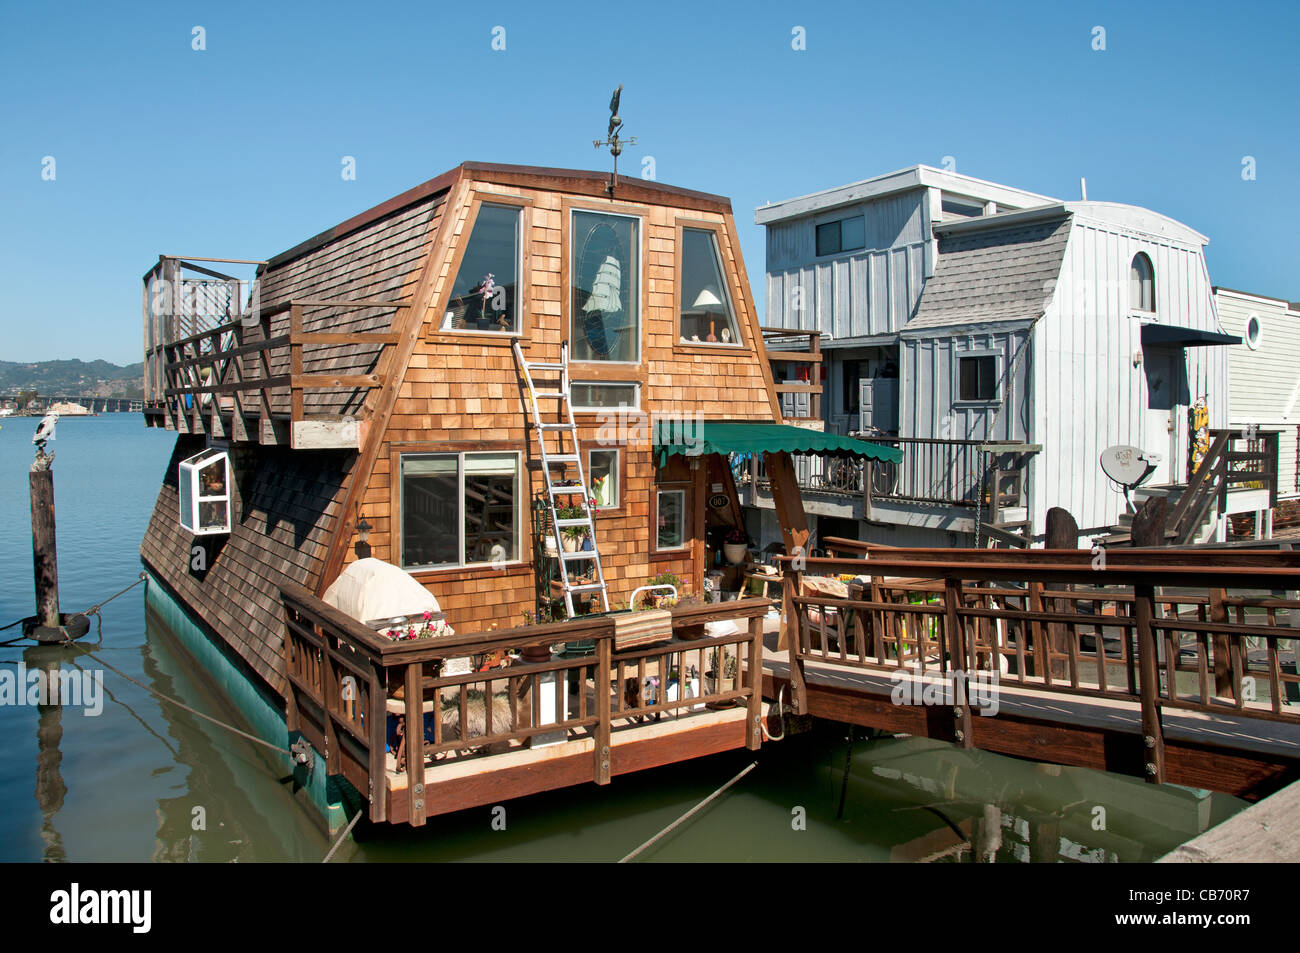 Le Sausalito yacht community Baie de San Francisco California United States of America Banque D'Images